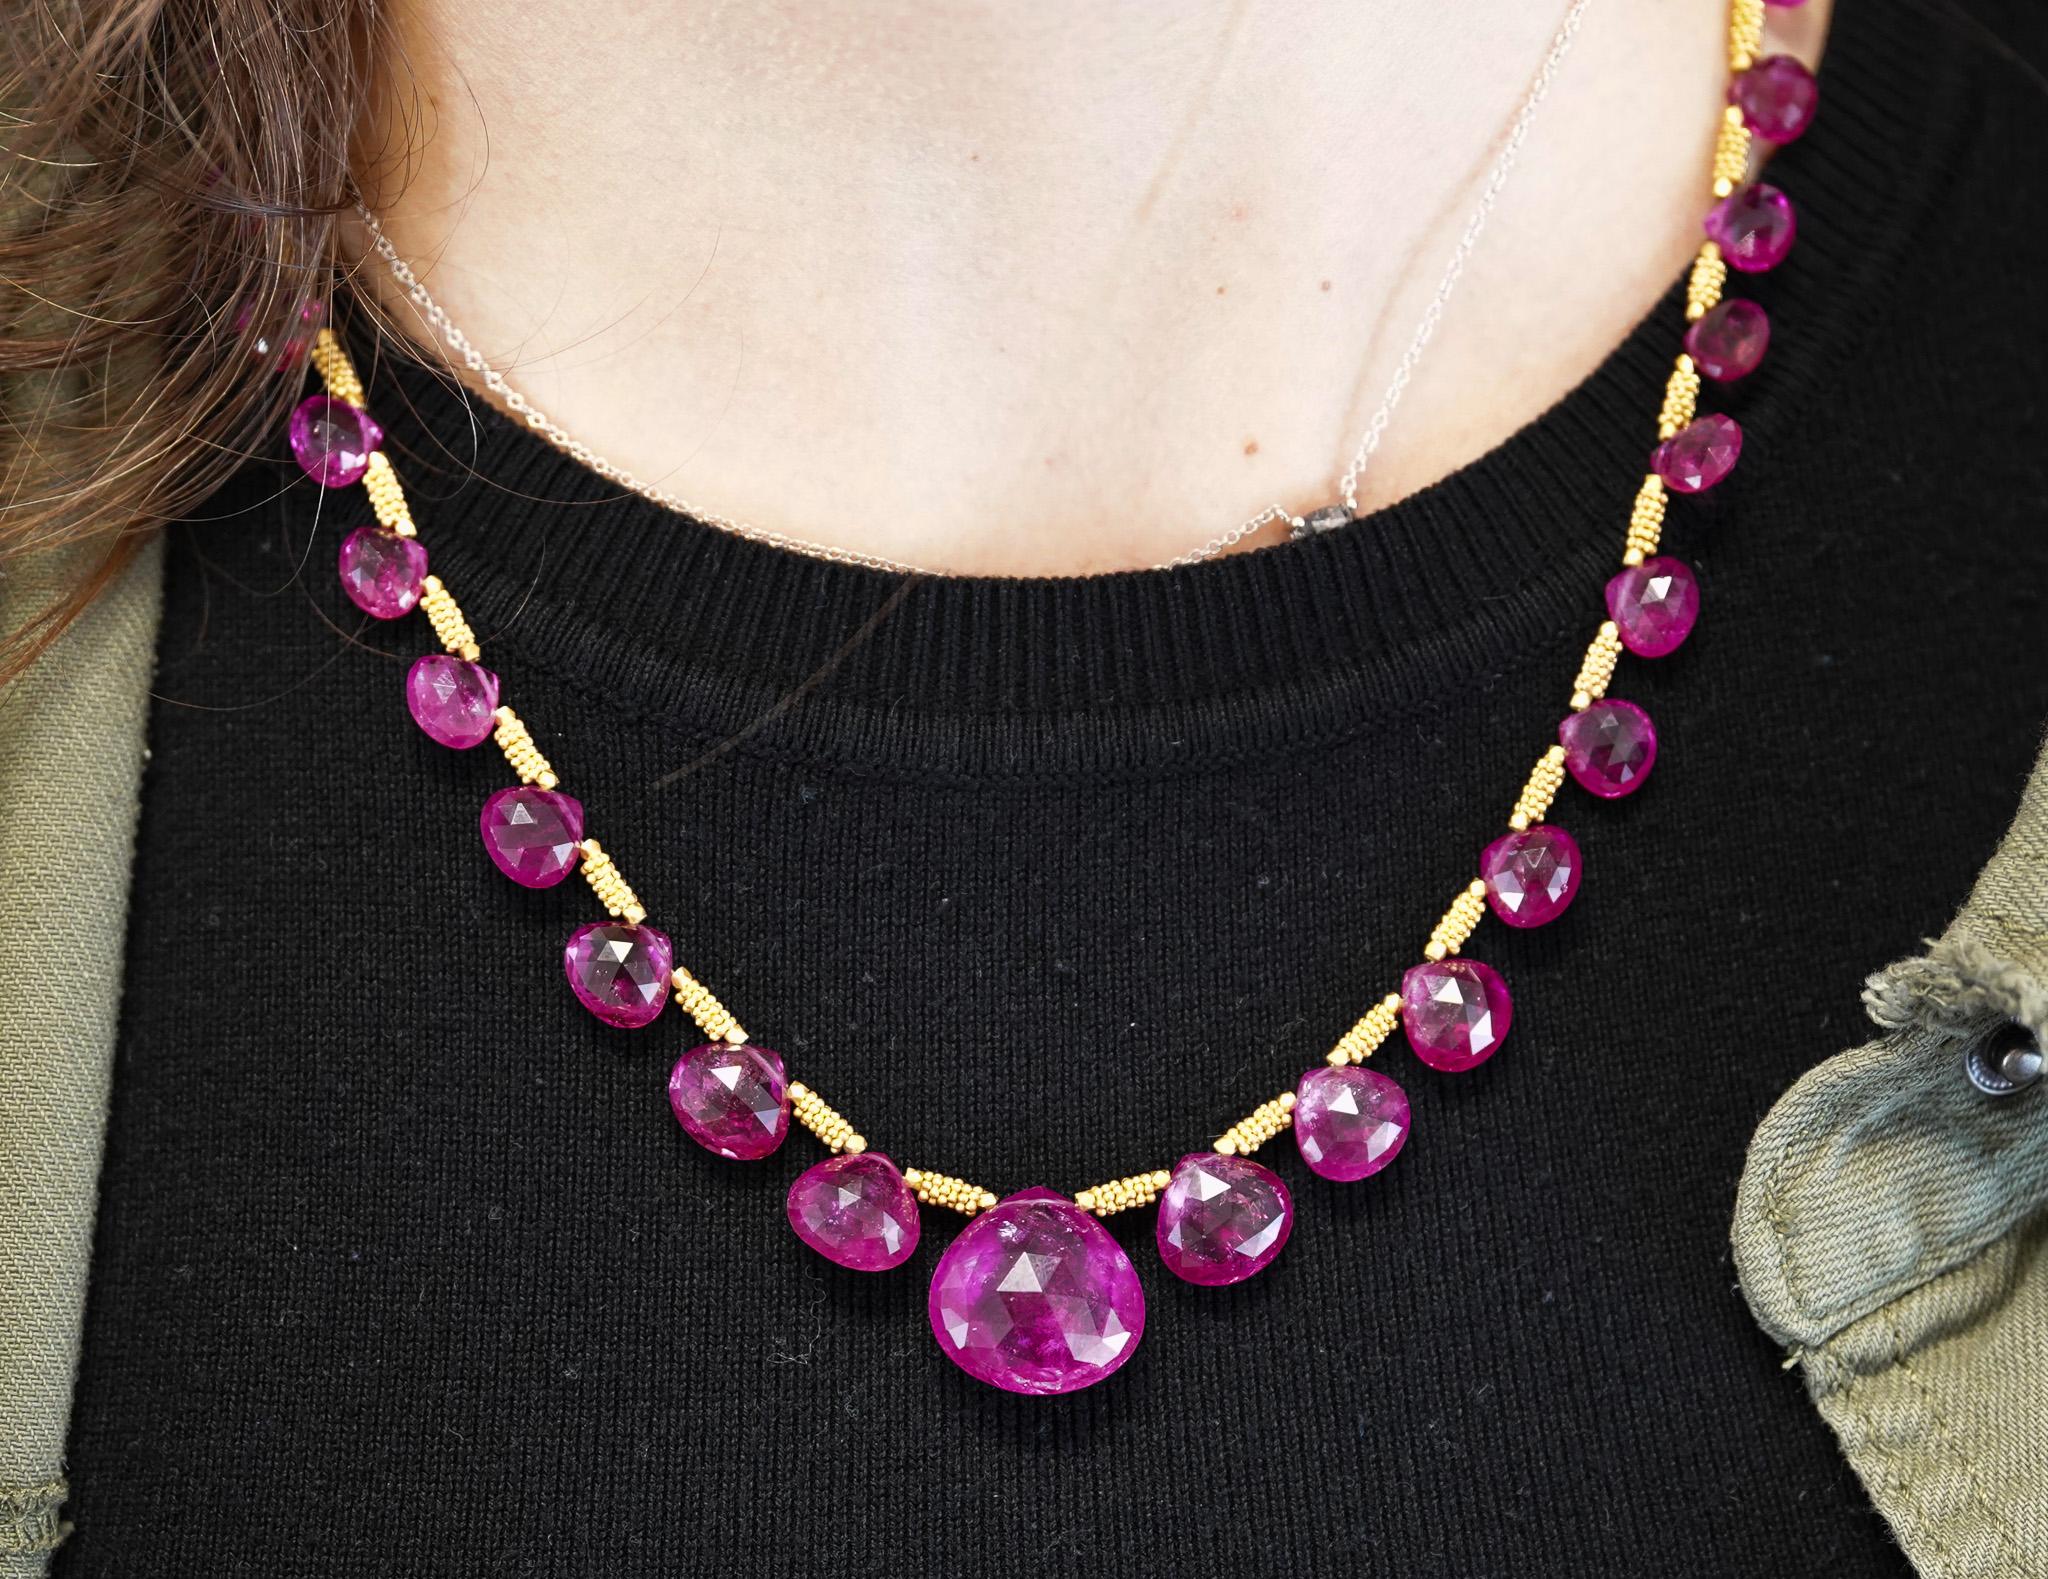 Women's GIA Certified 120 Carat Pear-Shape Pink Rubellite Tourmaline Necklace in 22K For Sale